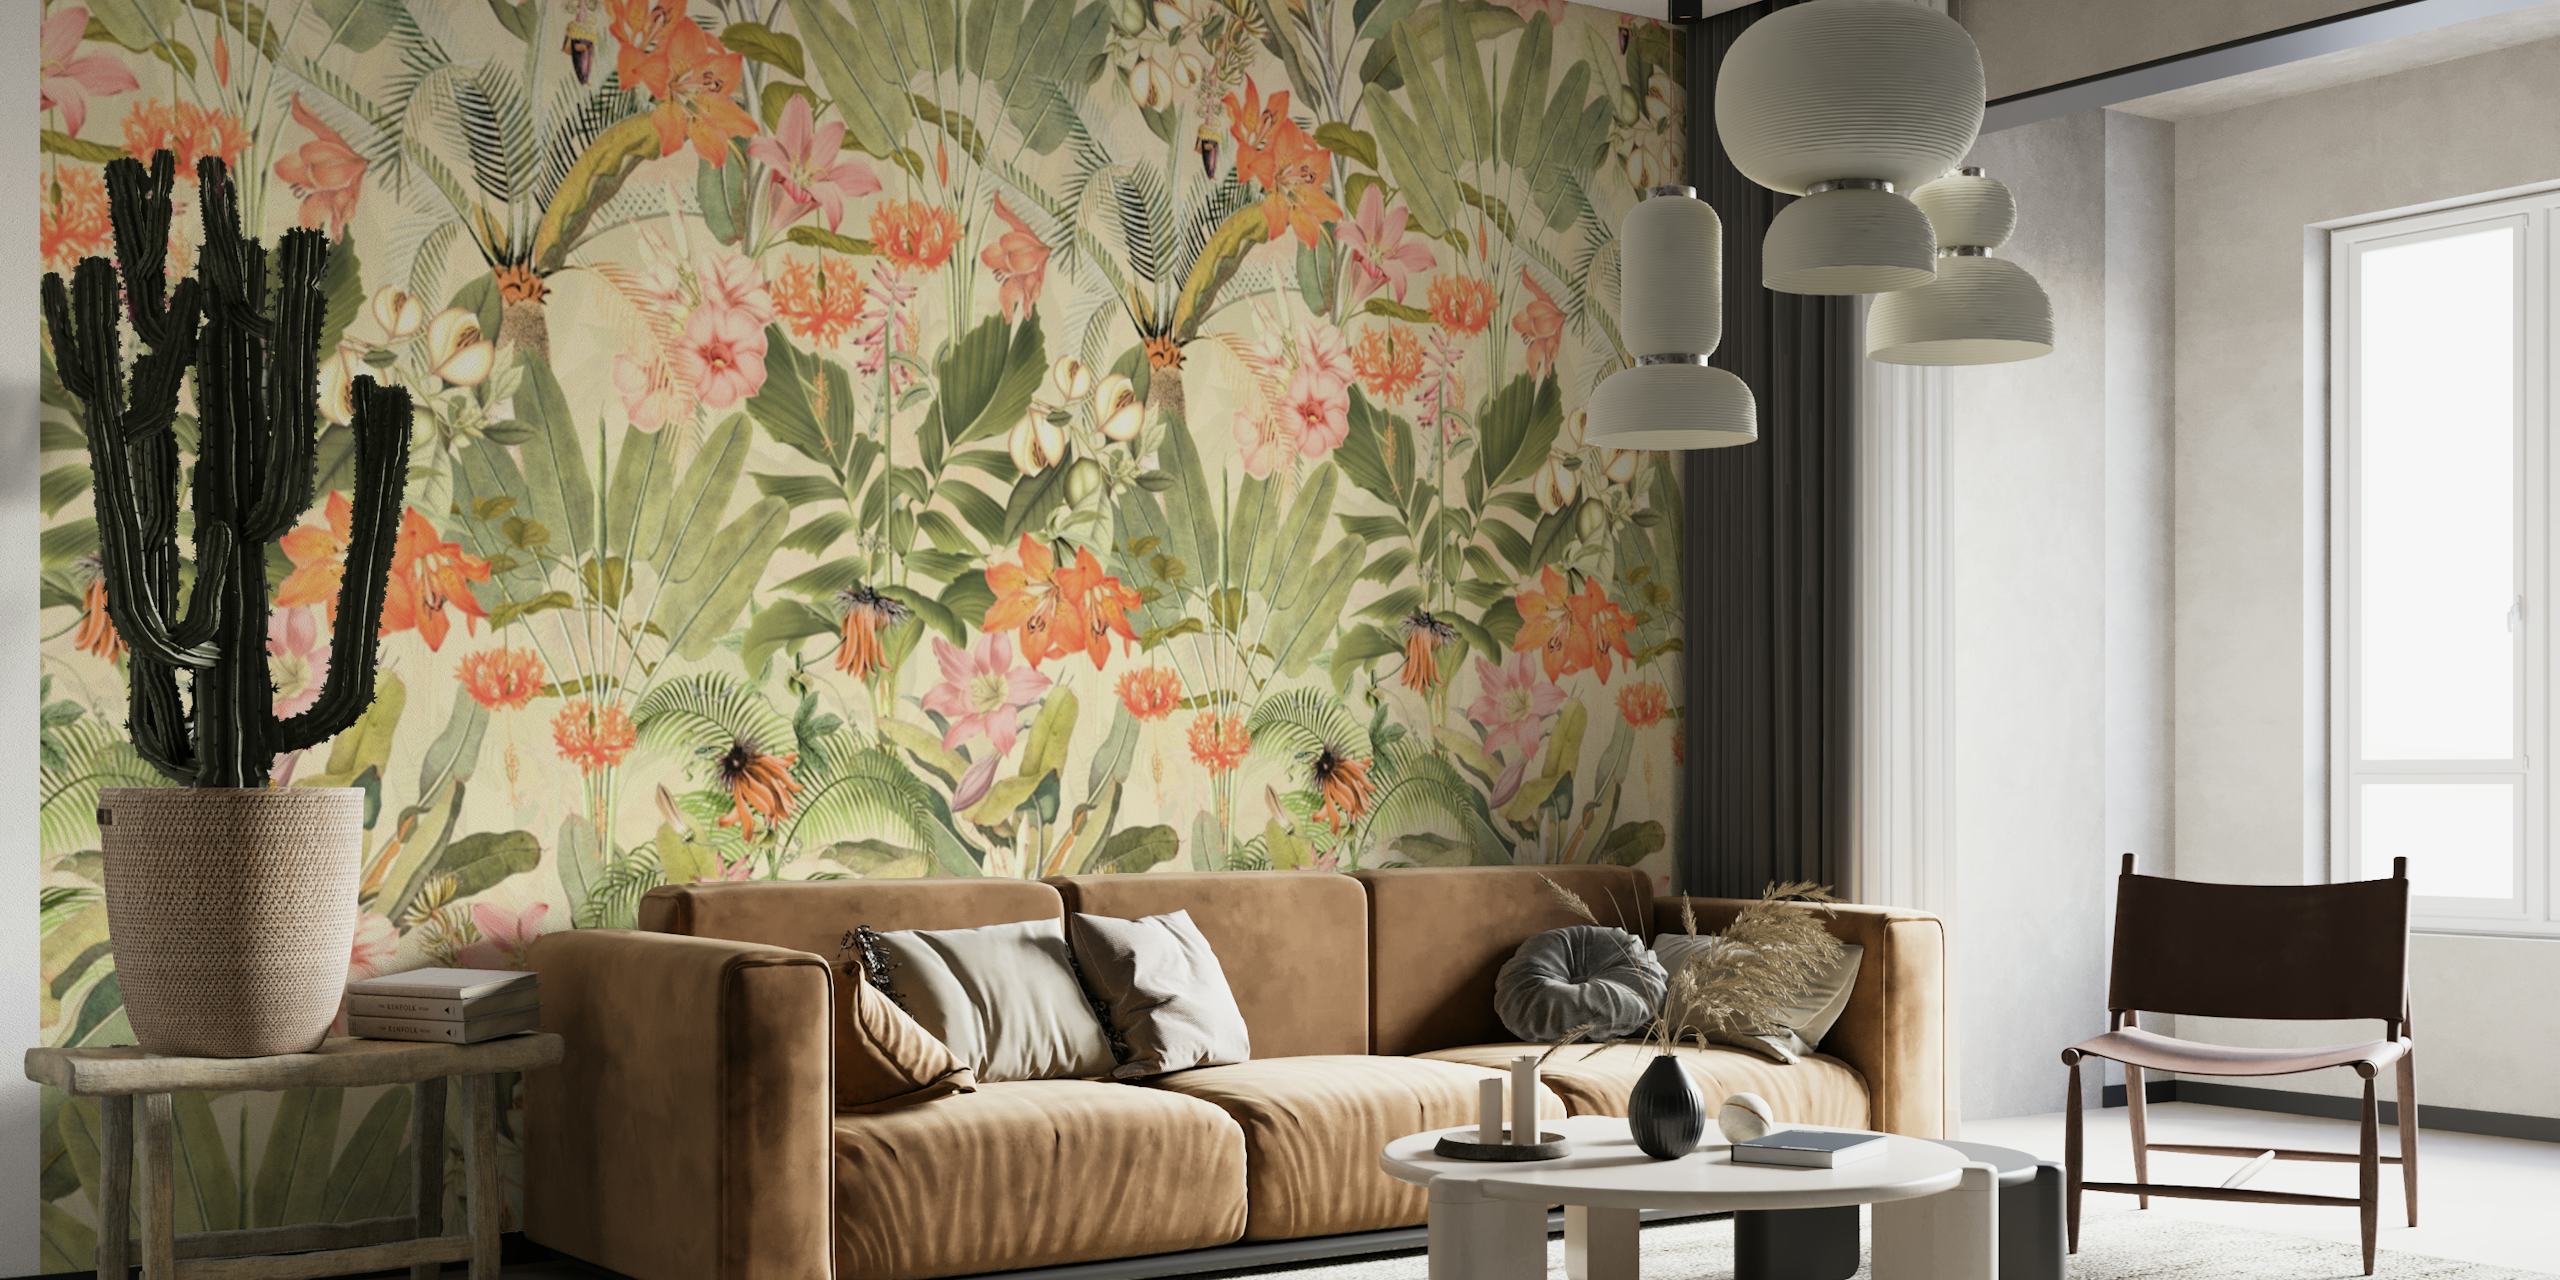 Tropical Hibiscus Jungle wall mural with lush greenery and vibrant flowers